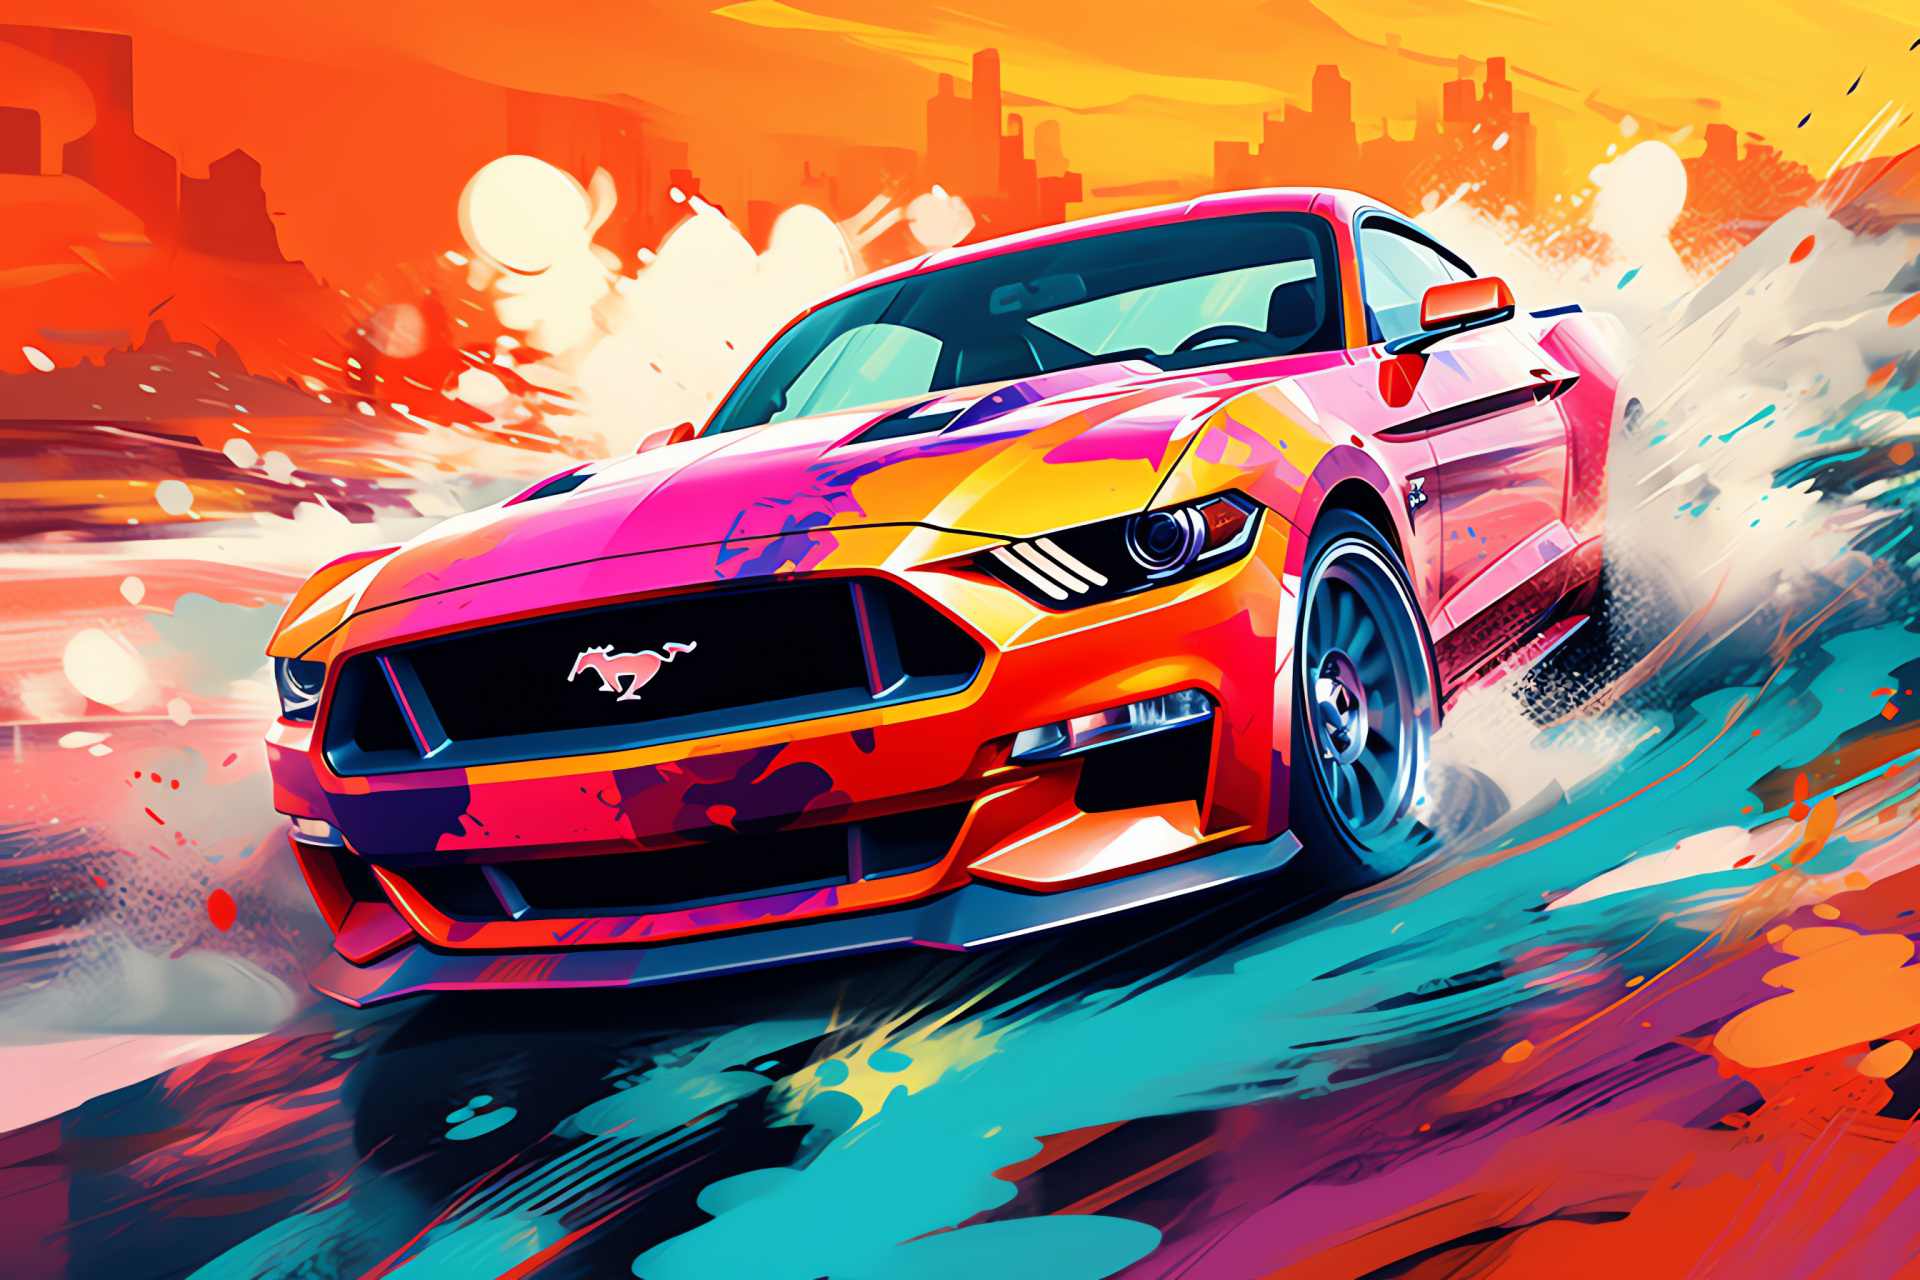 Ford Mustang detail, Landscape with Mustang, Auto painting art, Mustang vibrancy, Car enthusiast, HD Desktop Wallpaper